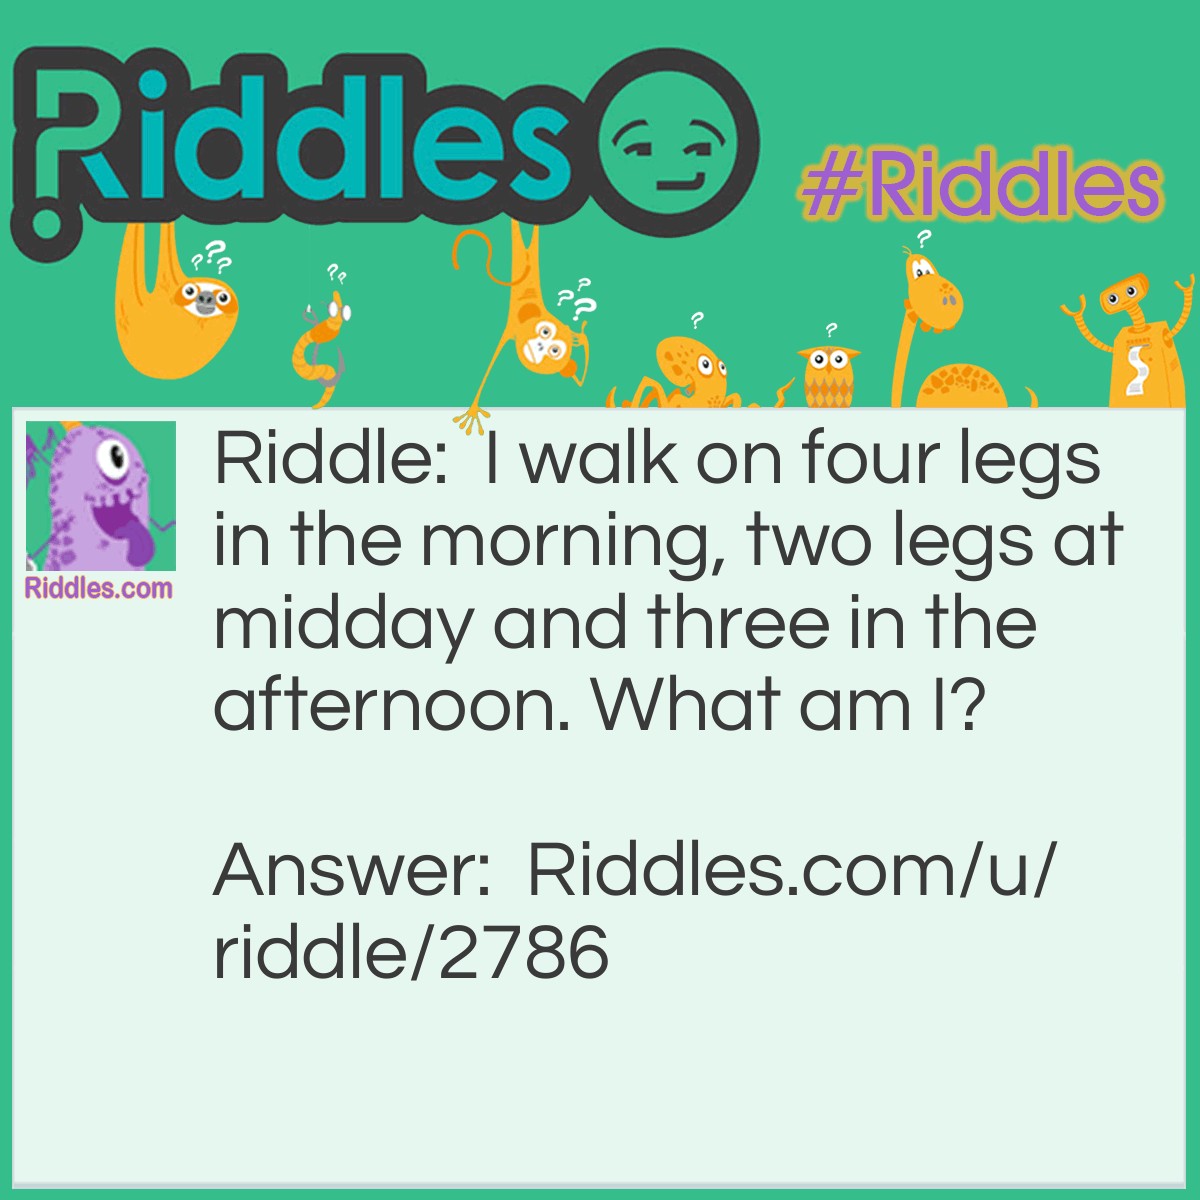 Riddle: I walk on four legs in the morning, two legs at midday and three in the afternoon. What am I? Answer: Man. At the beginning of life, you crawl on four legs. During the middle of life, you walk on two legs. And at the end of life, you use a cane so therefore you have three legs.